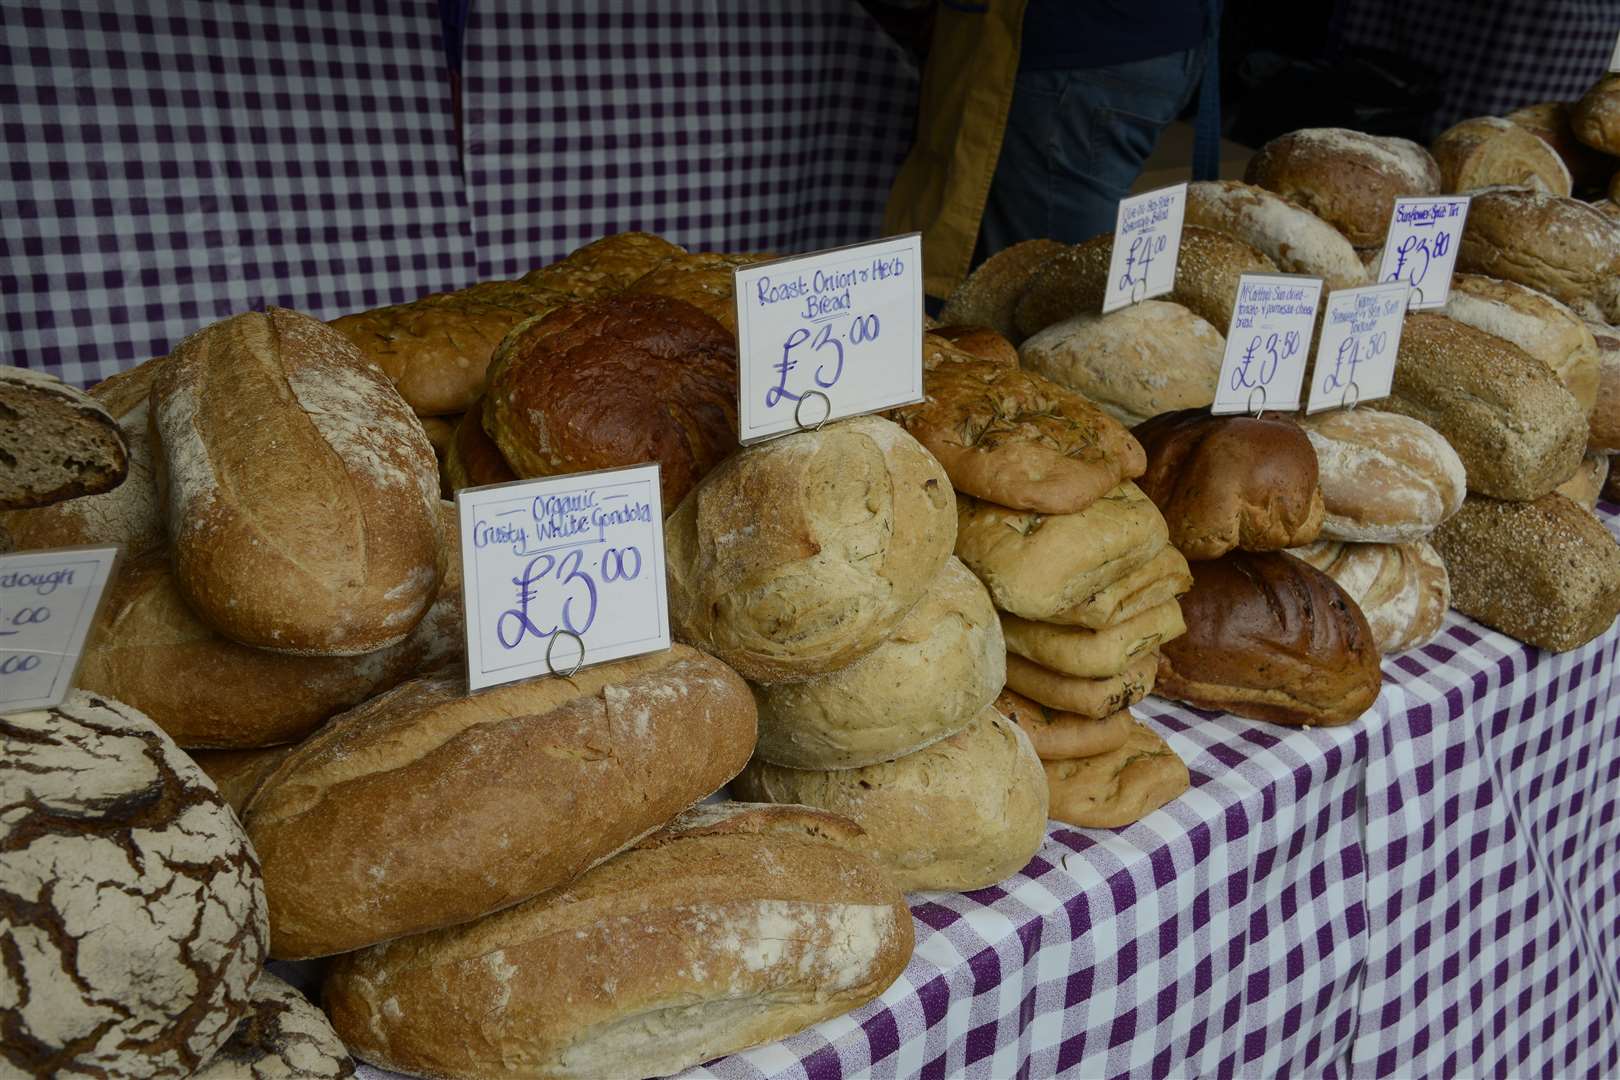 Some of the Artisan breads from Broadstairs Homemade at last year's event Picture: Paul Amos